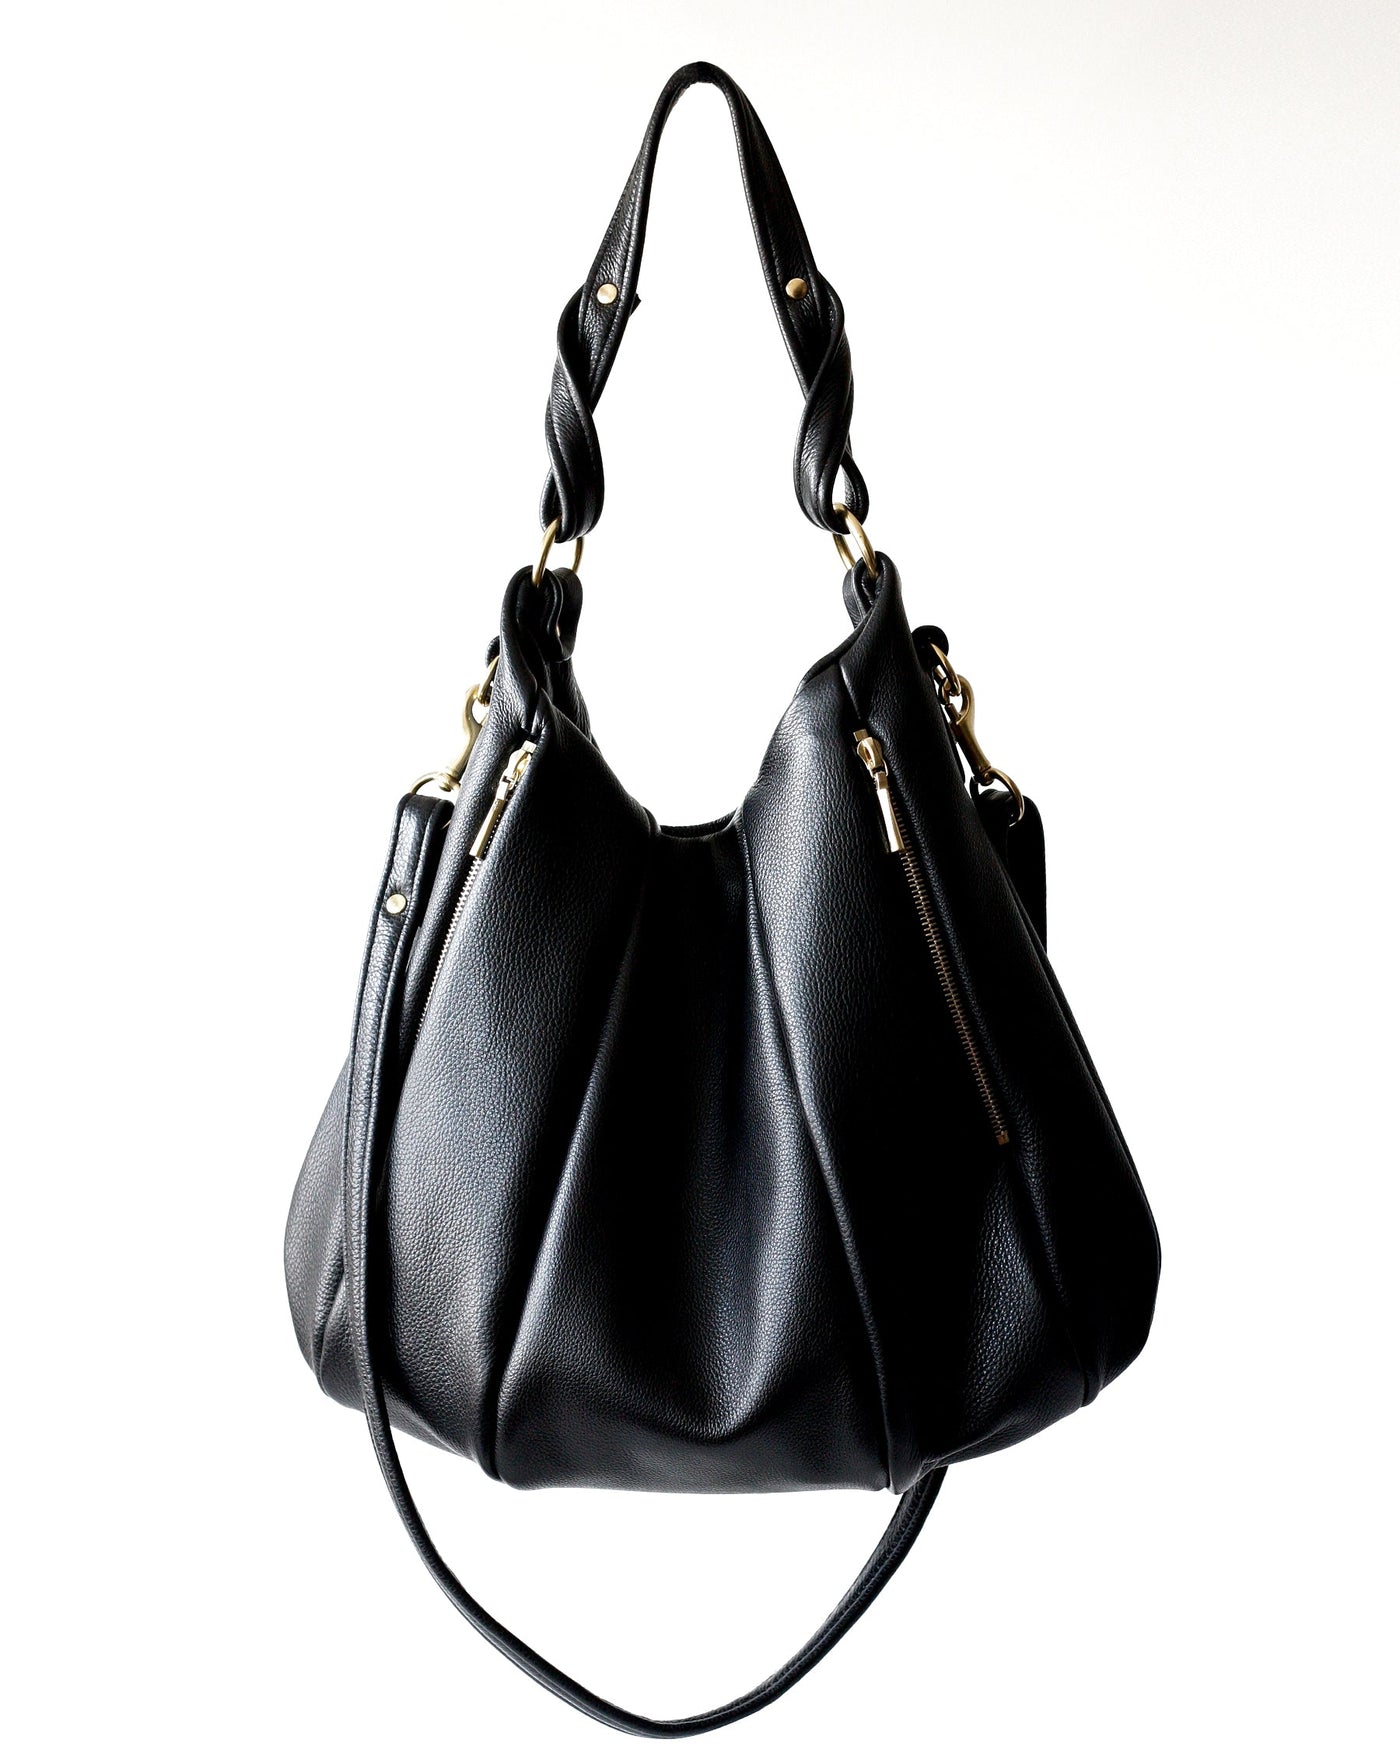 Lotus Bag - Opelle bag Permanent Collection - Opelle leather handbag handcrafted leather bag toronto Canada